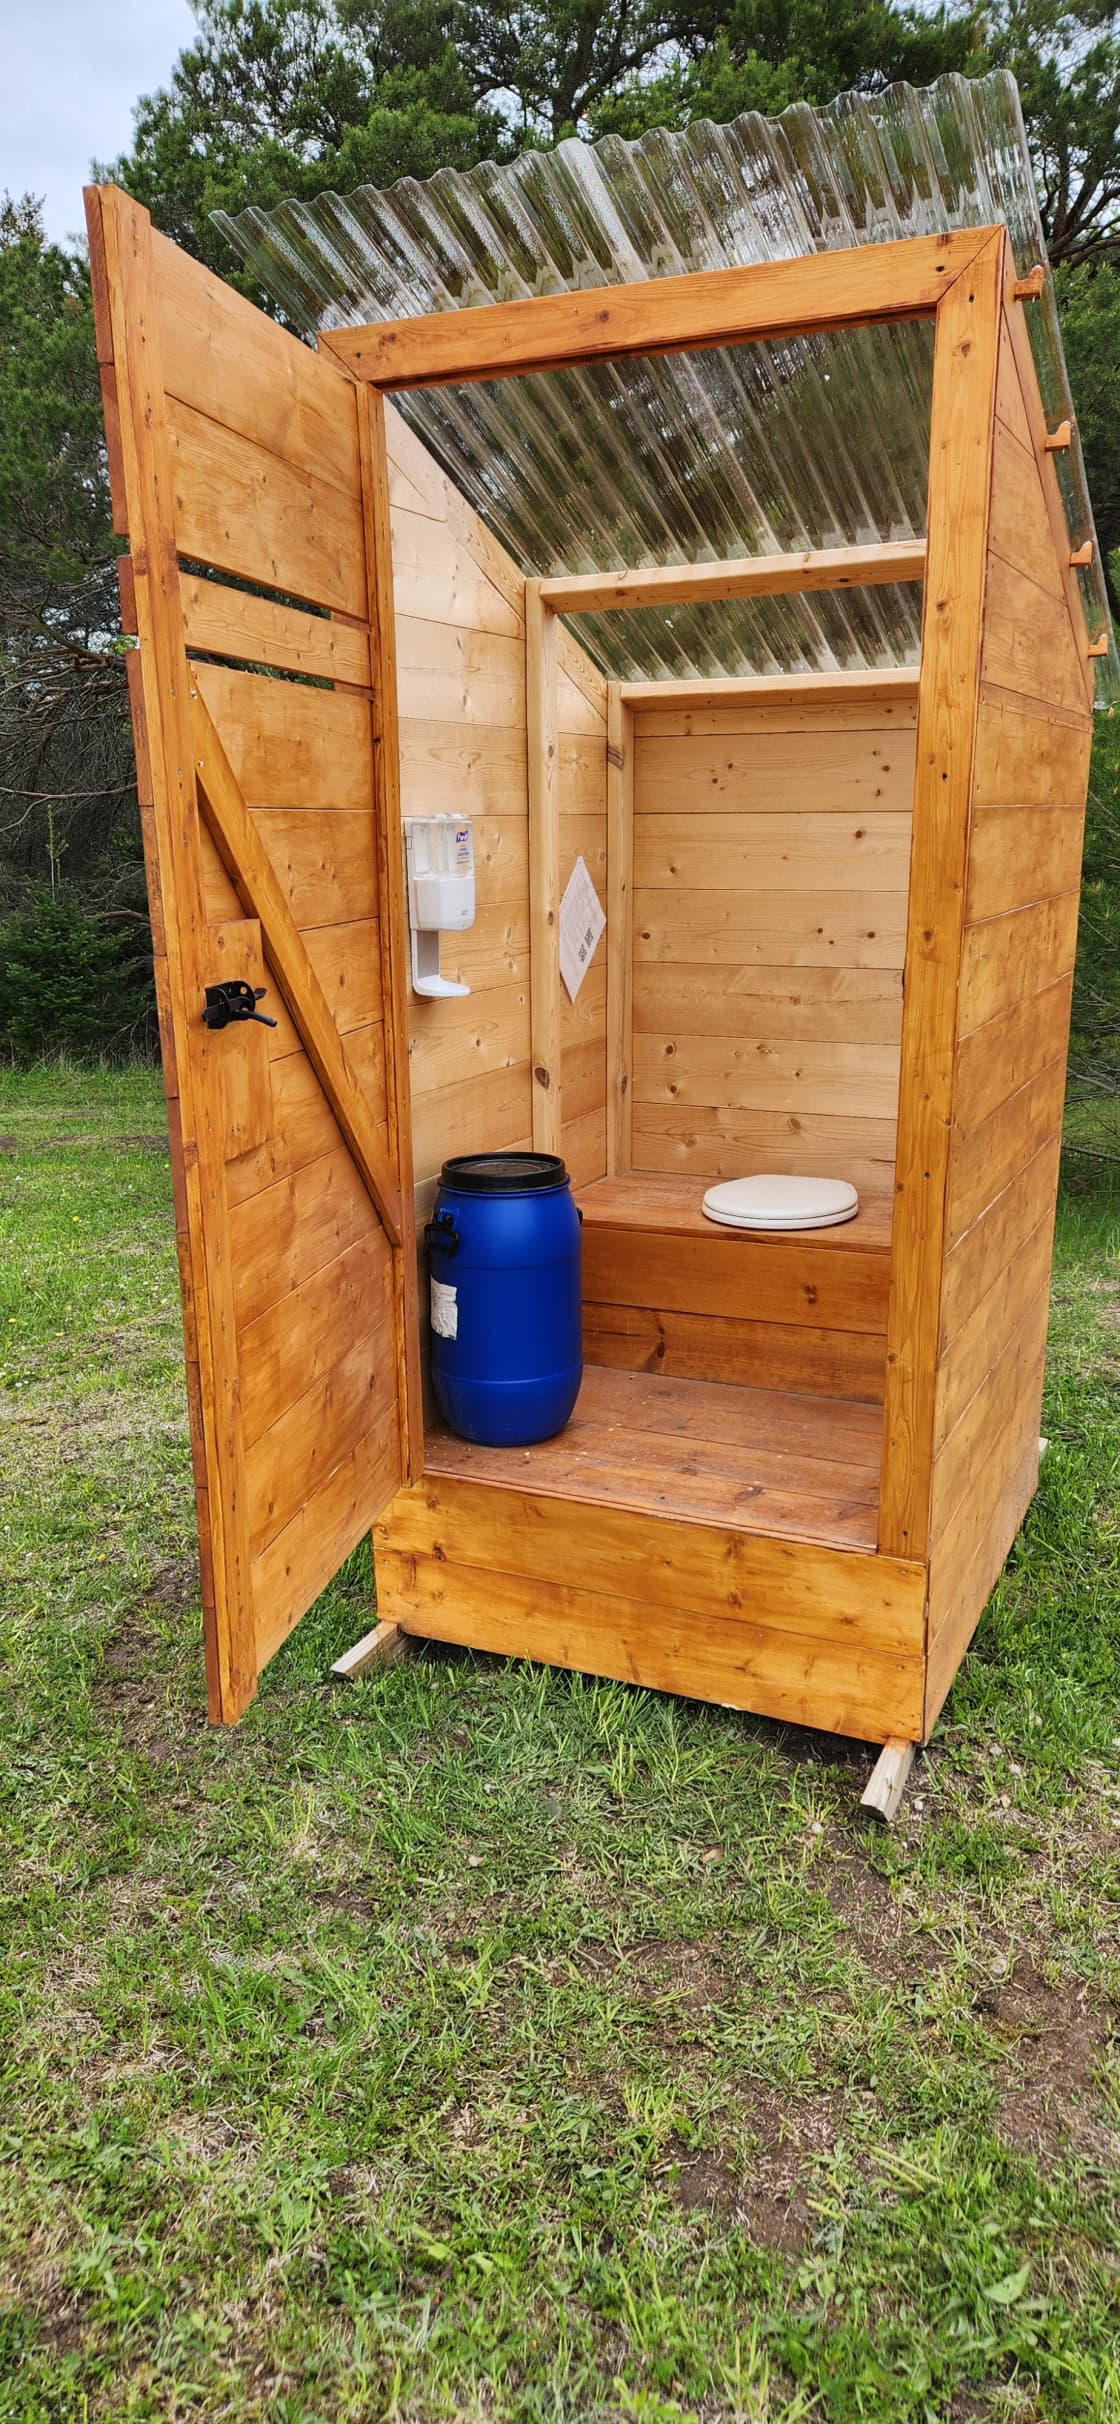 Interior of composting outhouse. Blue barrel holds the sawdust.